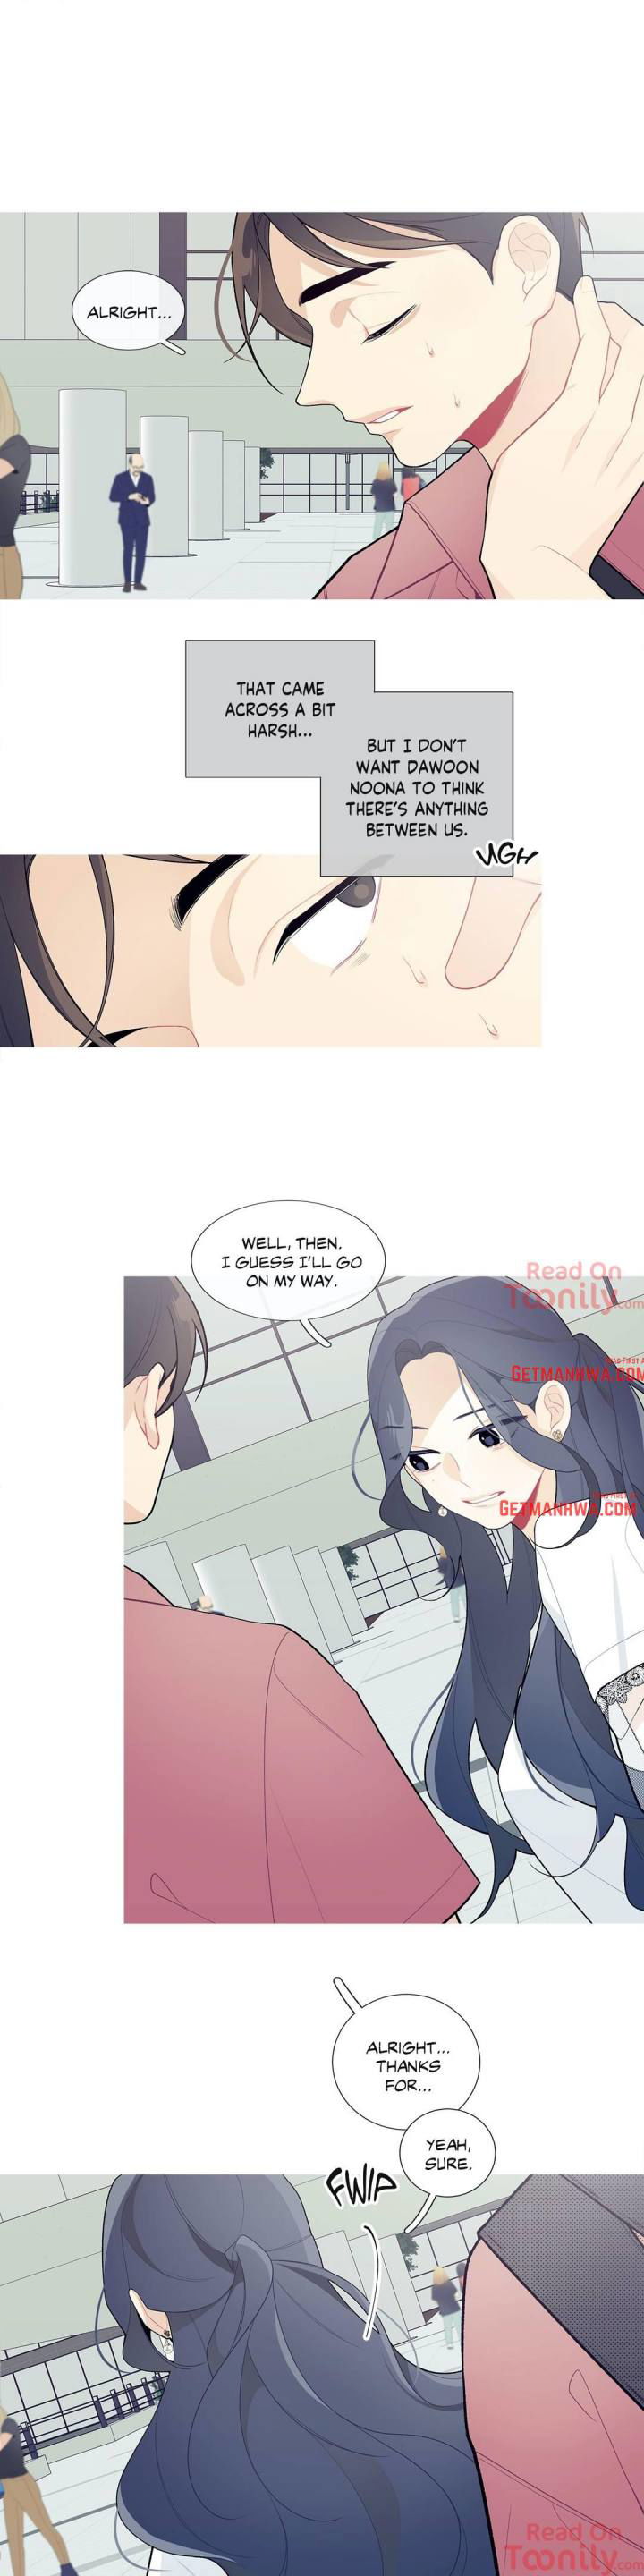 whats-going-on-chap-33-6